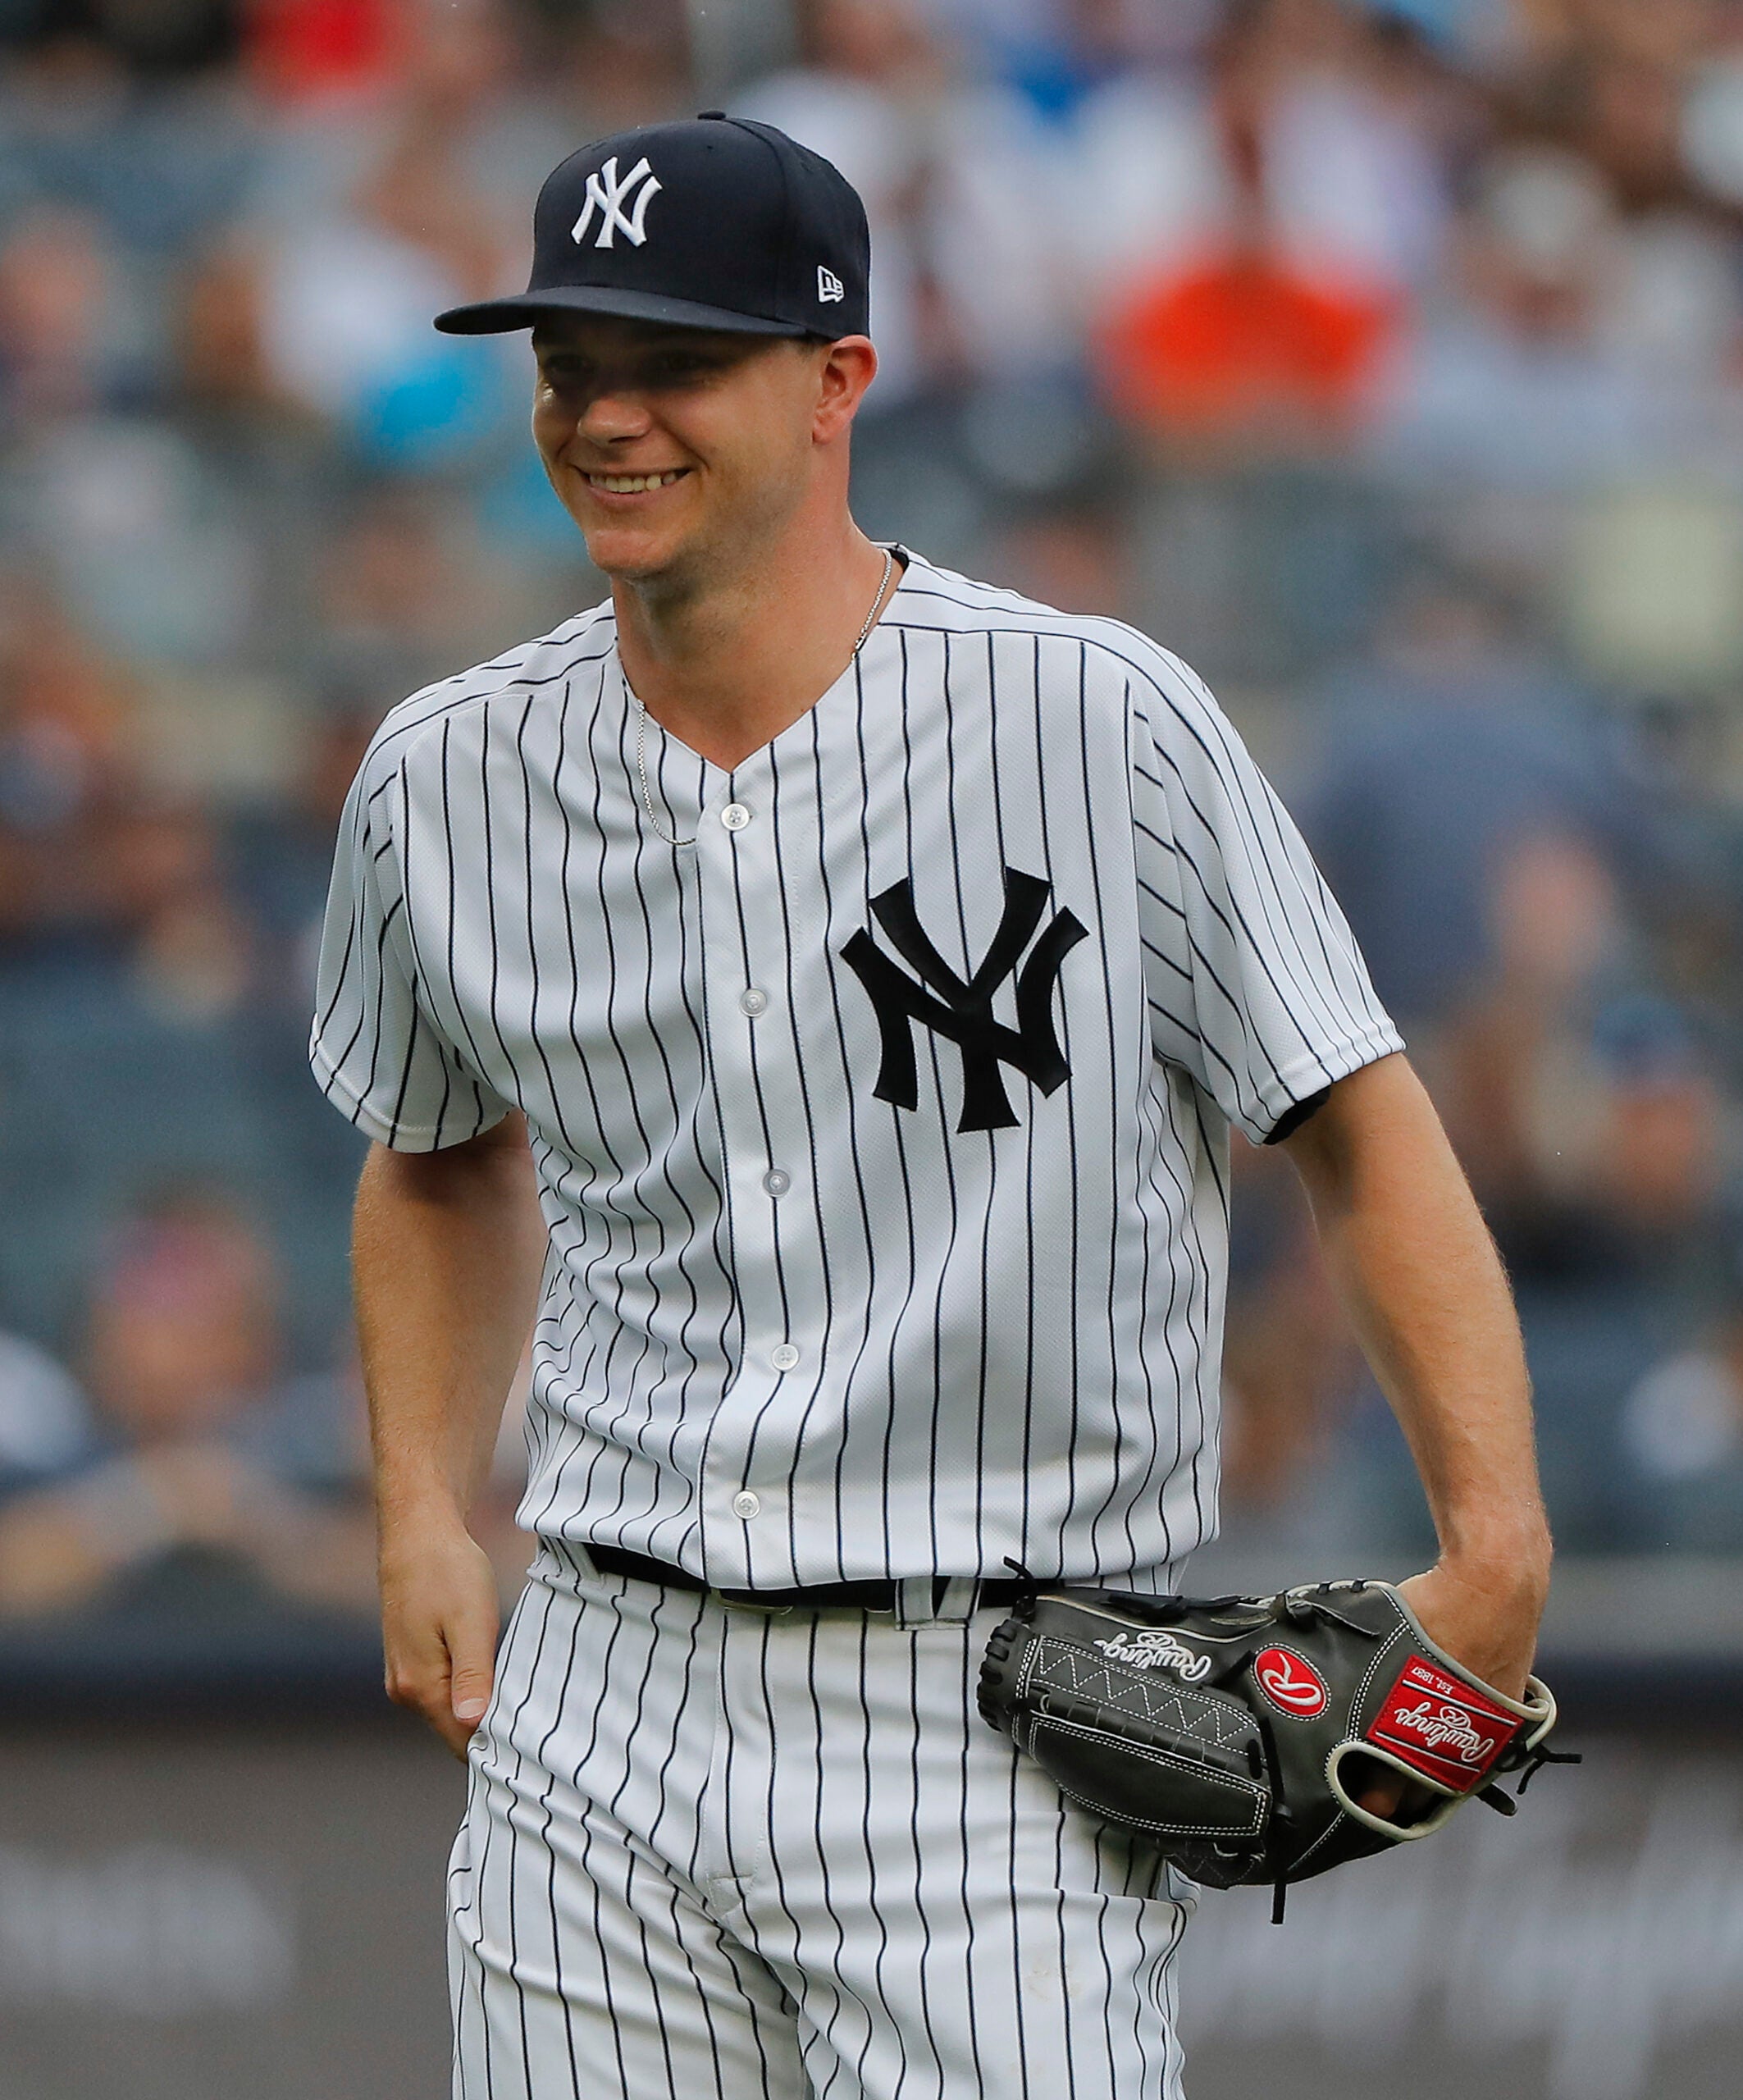 Sonny Gray through the years